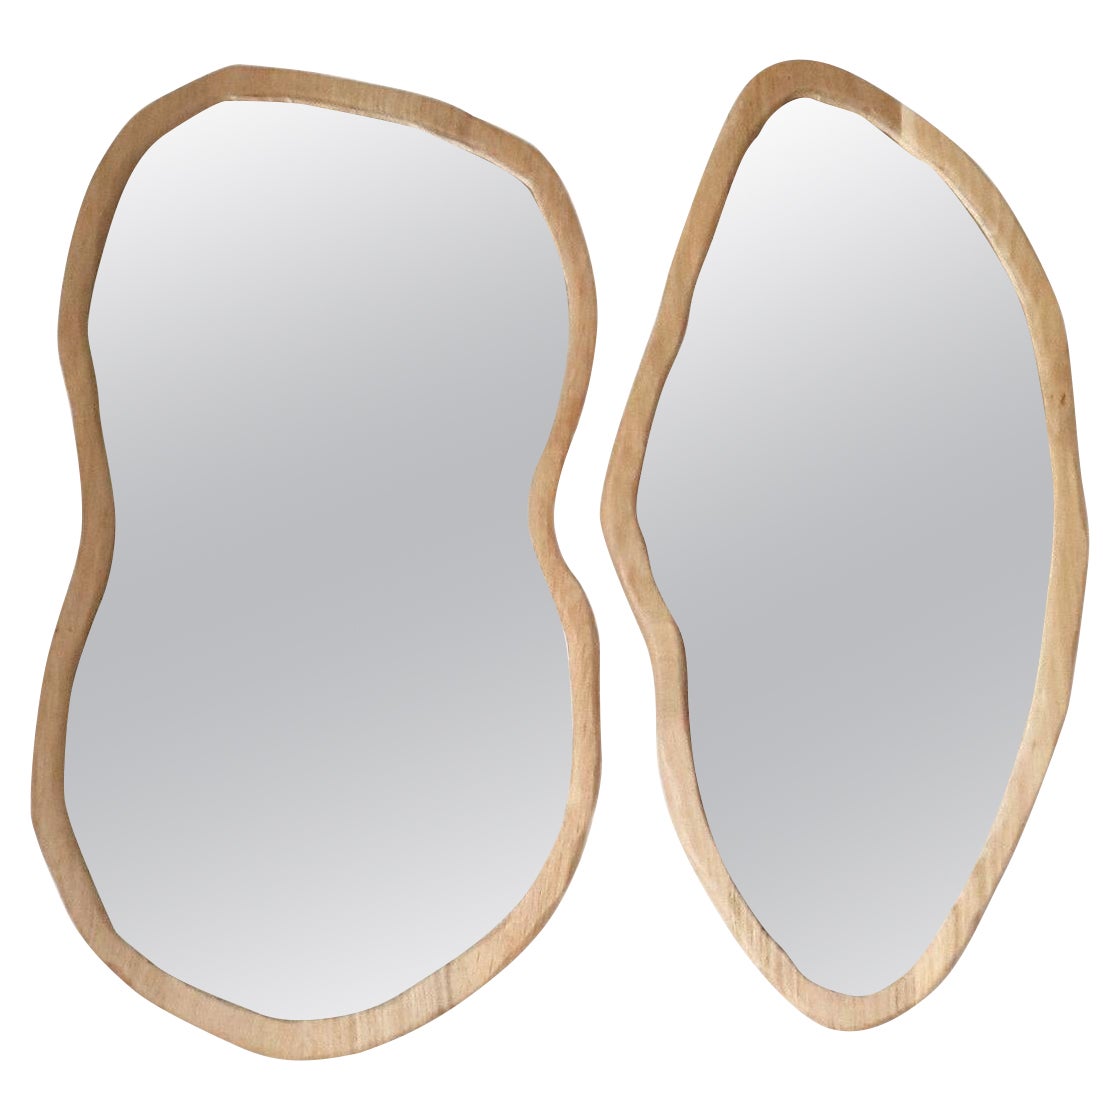 Set of 2 Rencontre Large Mirrors by Alice Lahana Studio For Sale